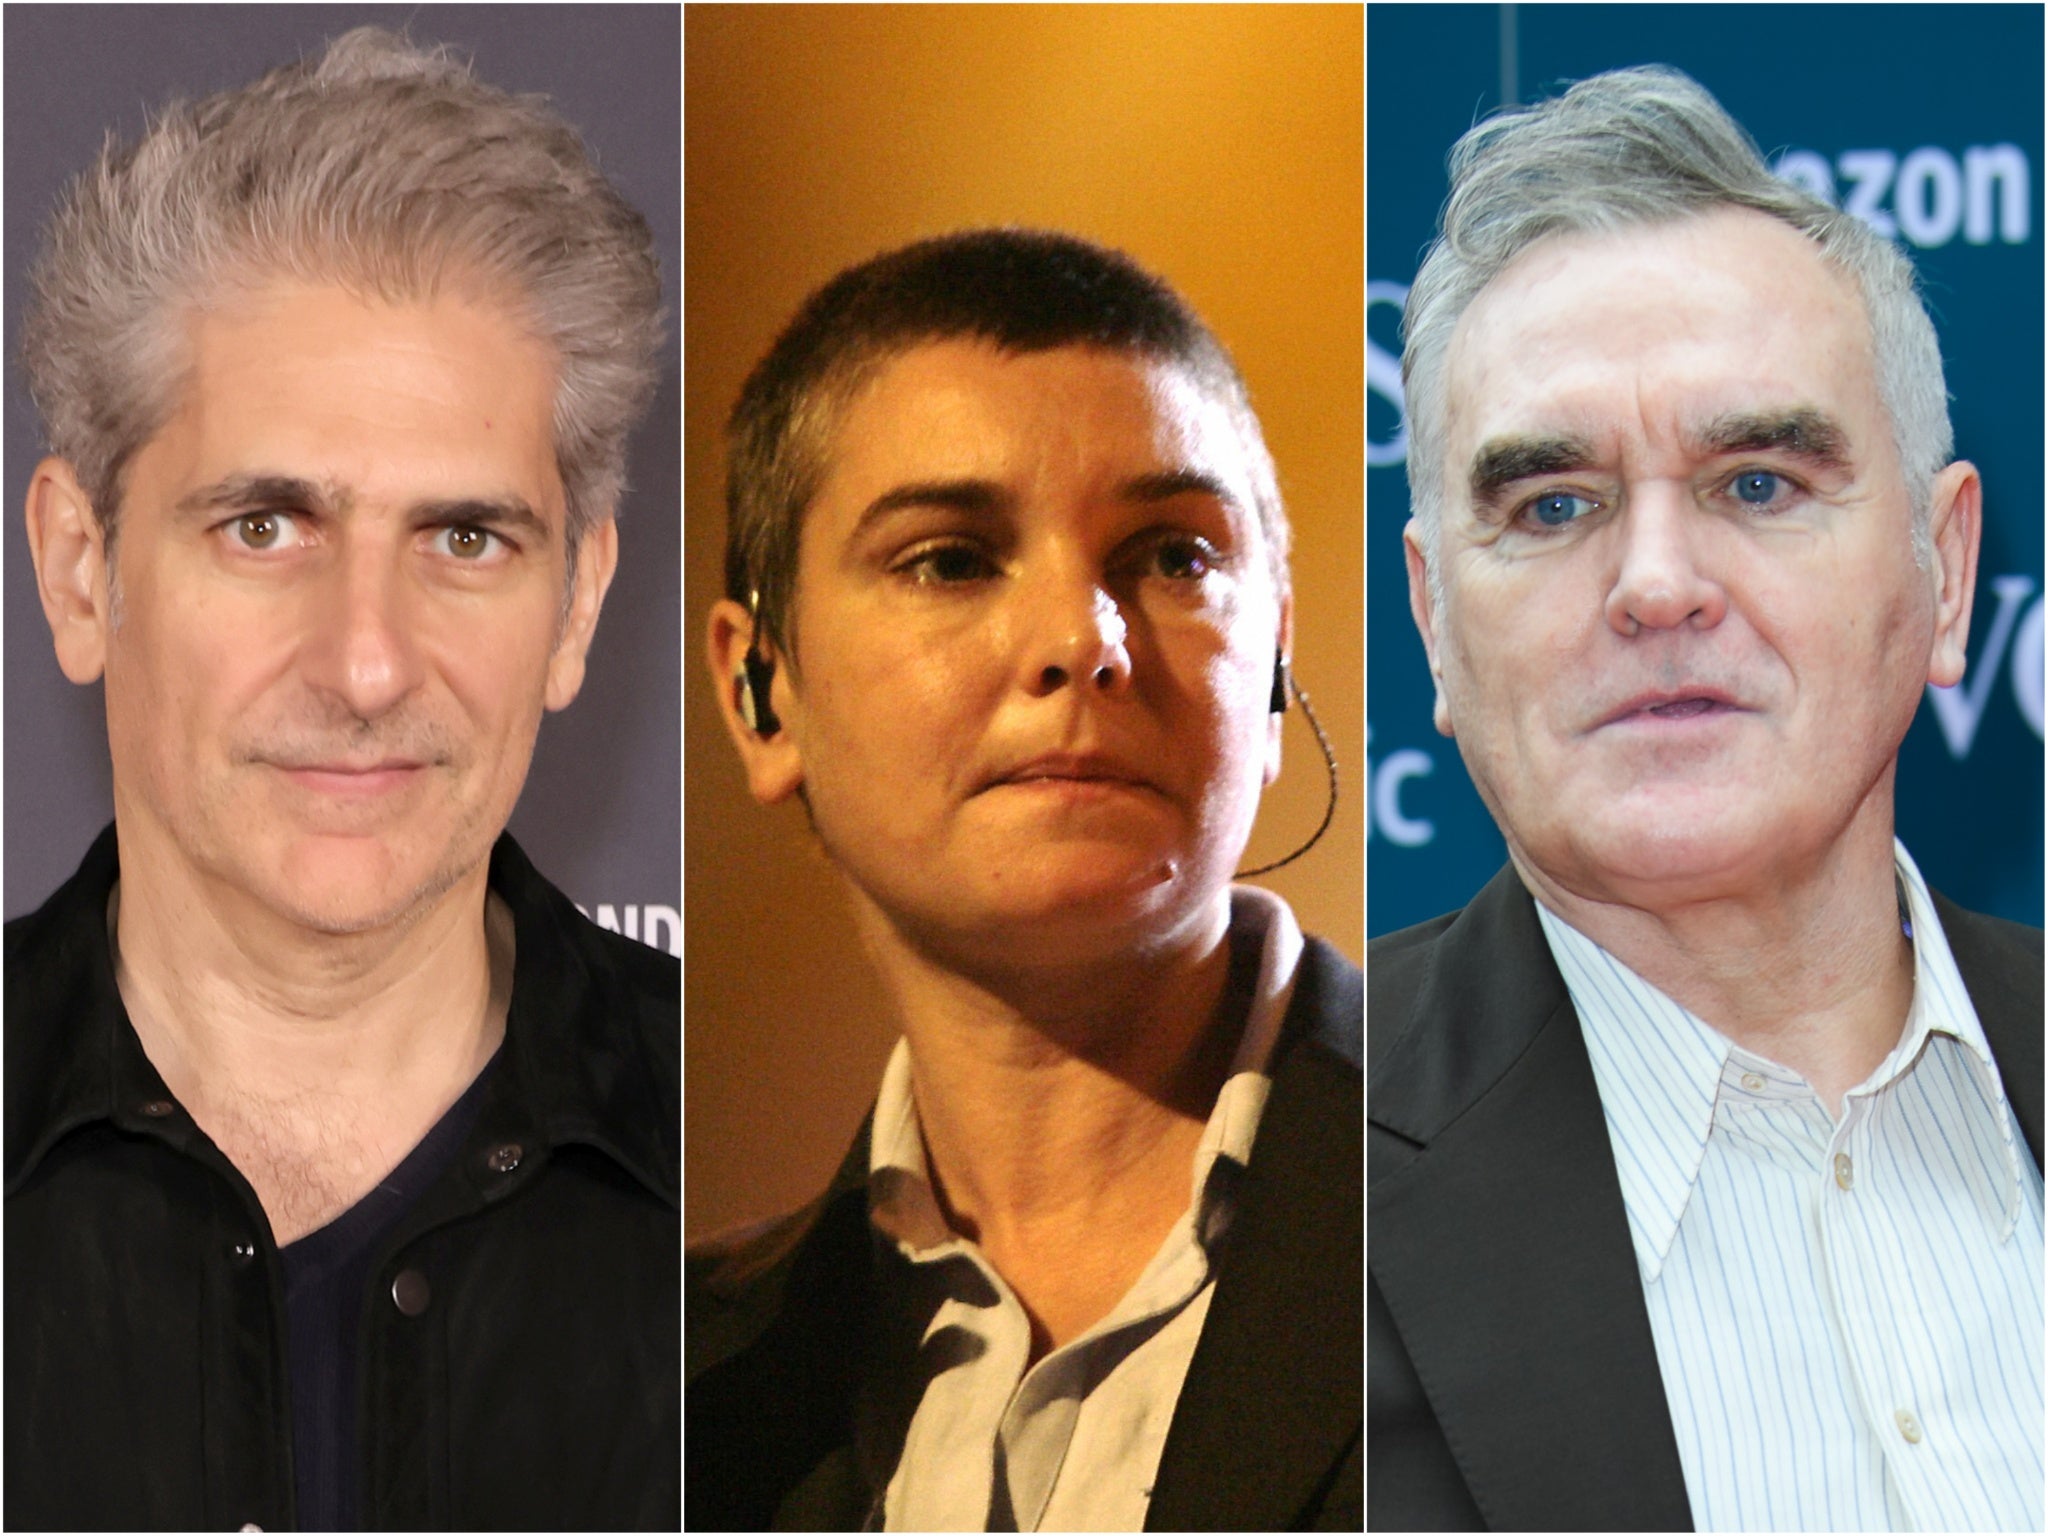 (From left) Michael Imperioli, Sinead O’Connor and Morrissey